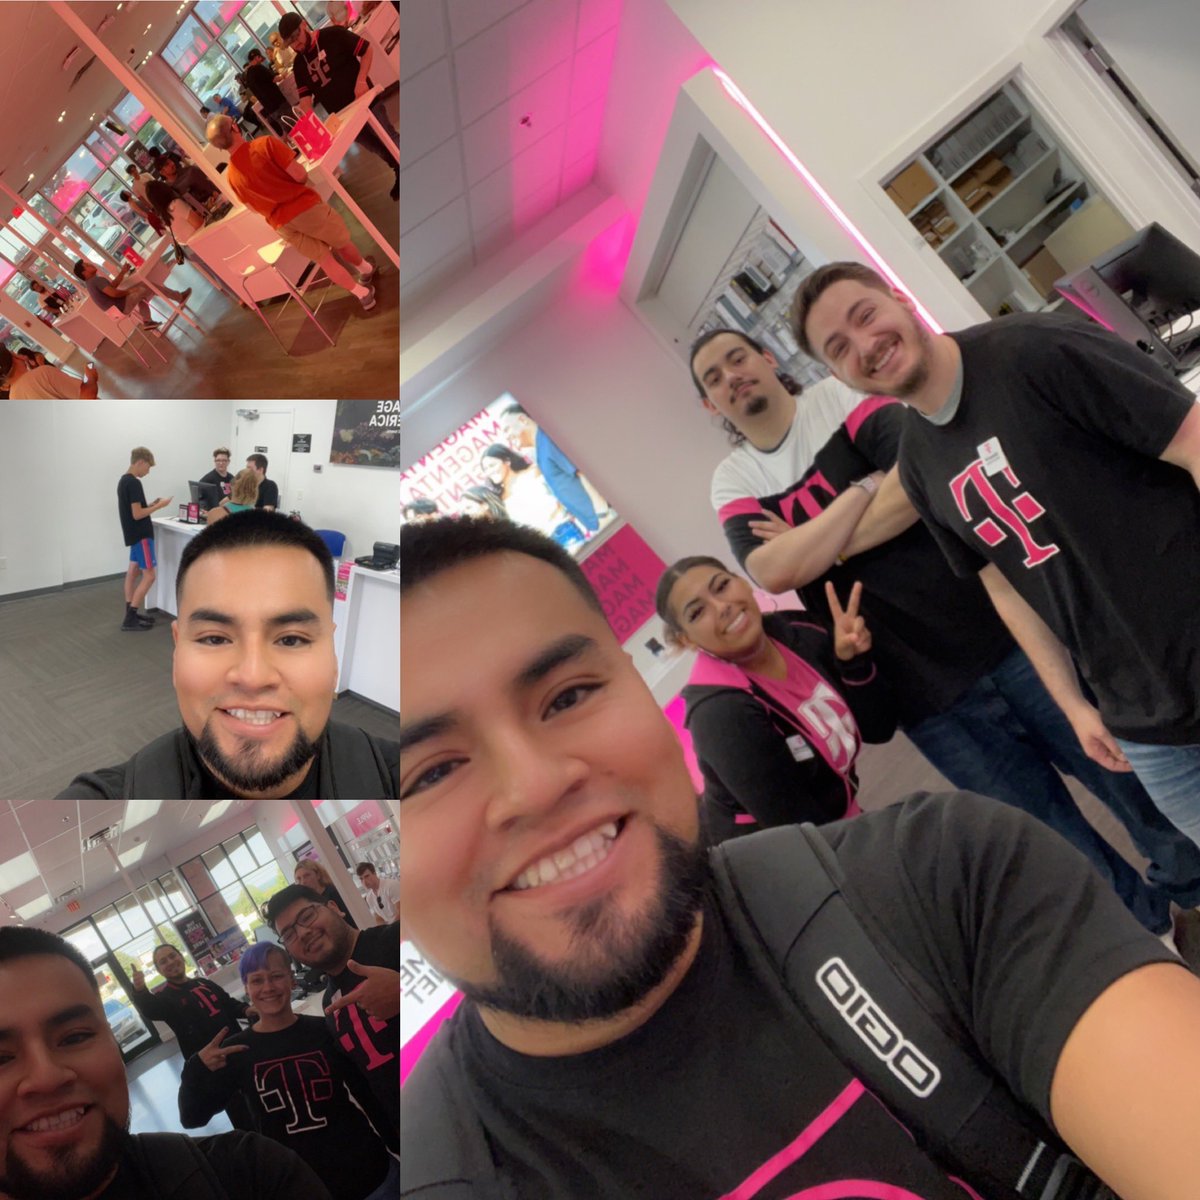 Another day of connecting with customers and supporting the front lines! #iPhone14 #AngelsInTheOutfield #WisconsinWest